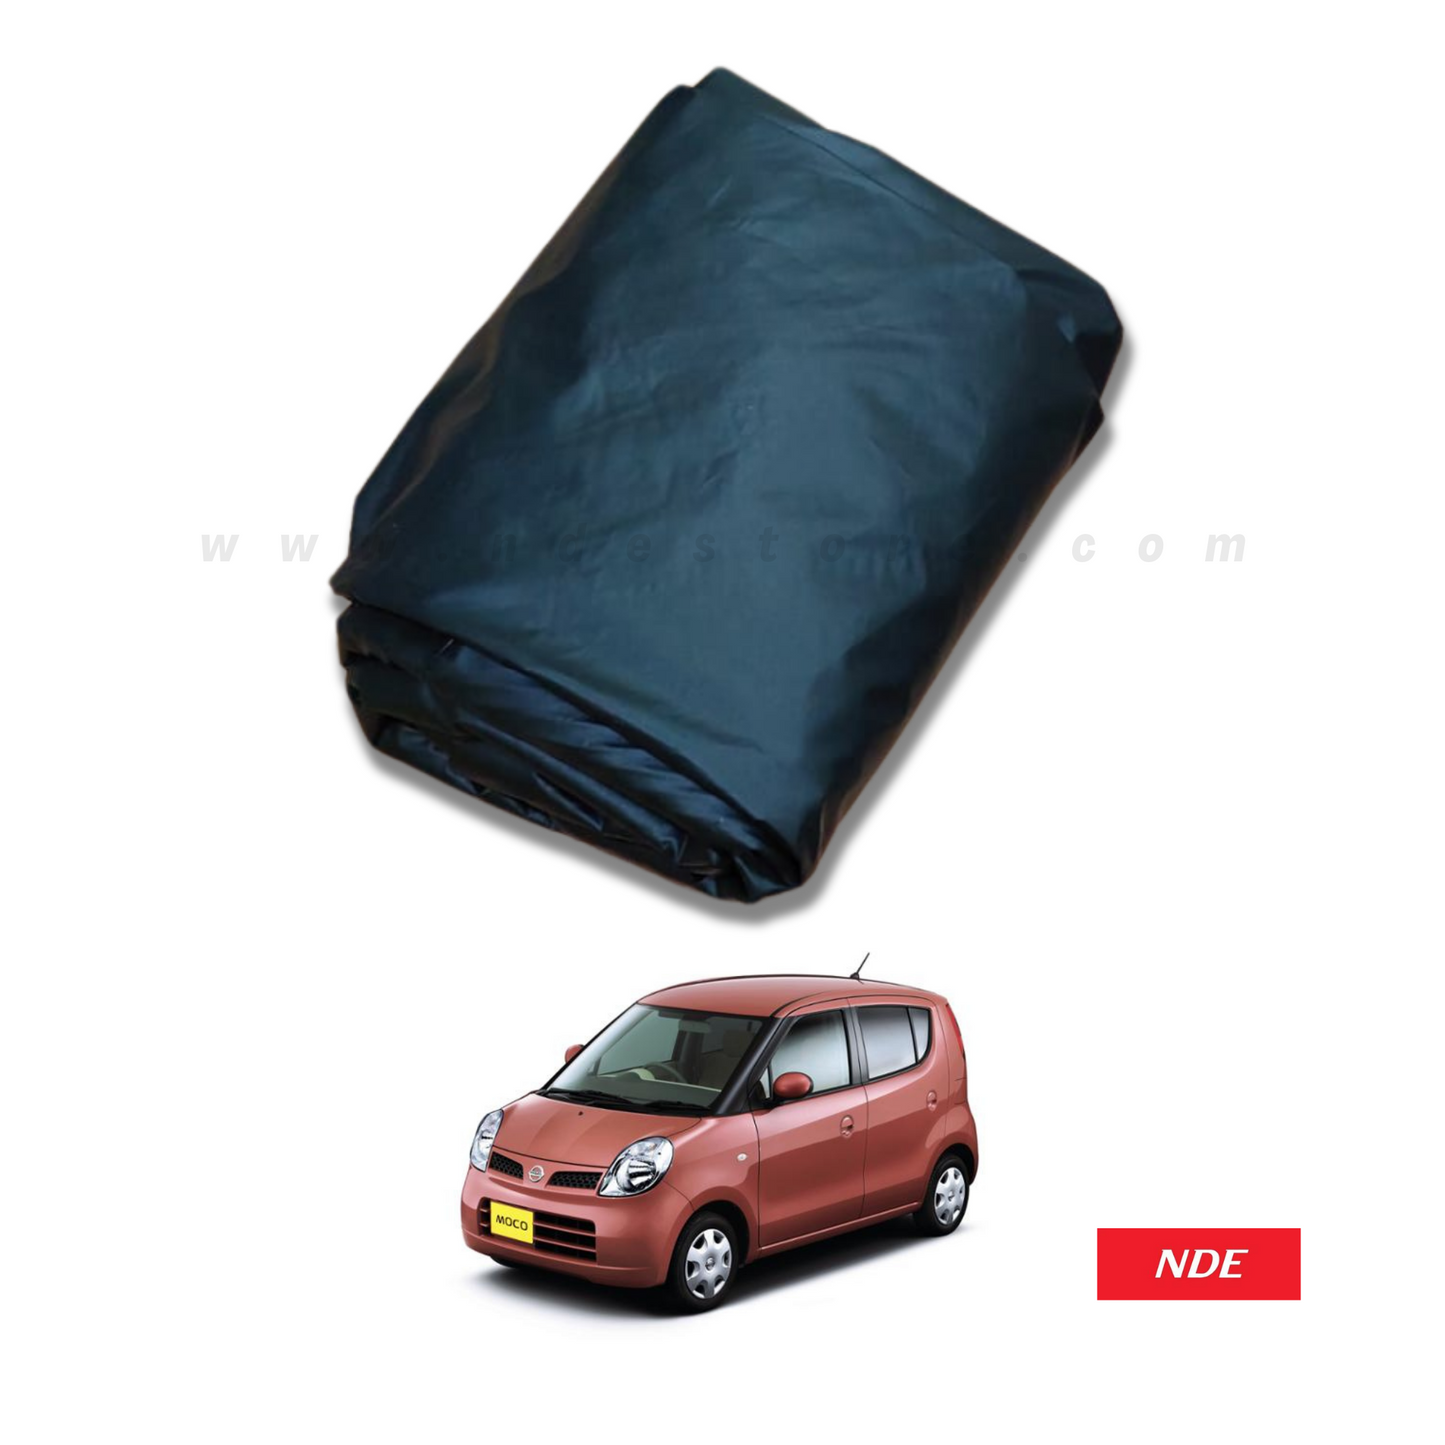 TOP COVER FOR NISSAN MOCO